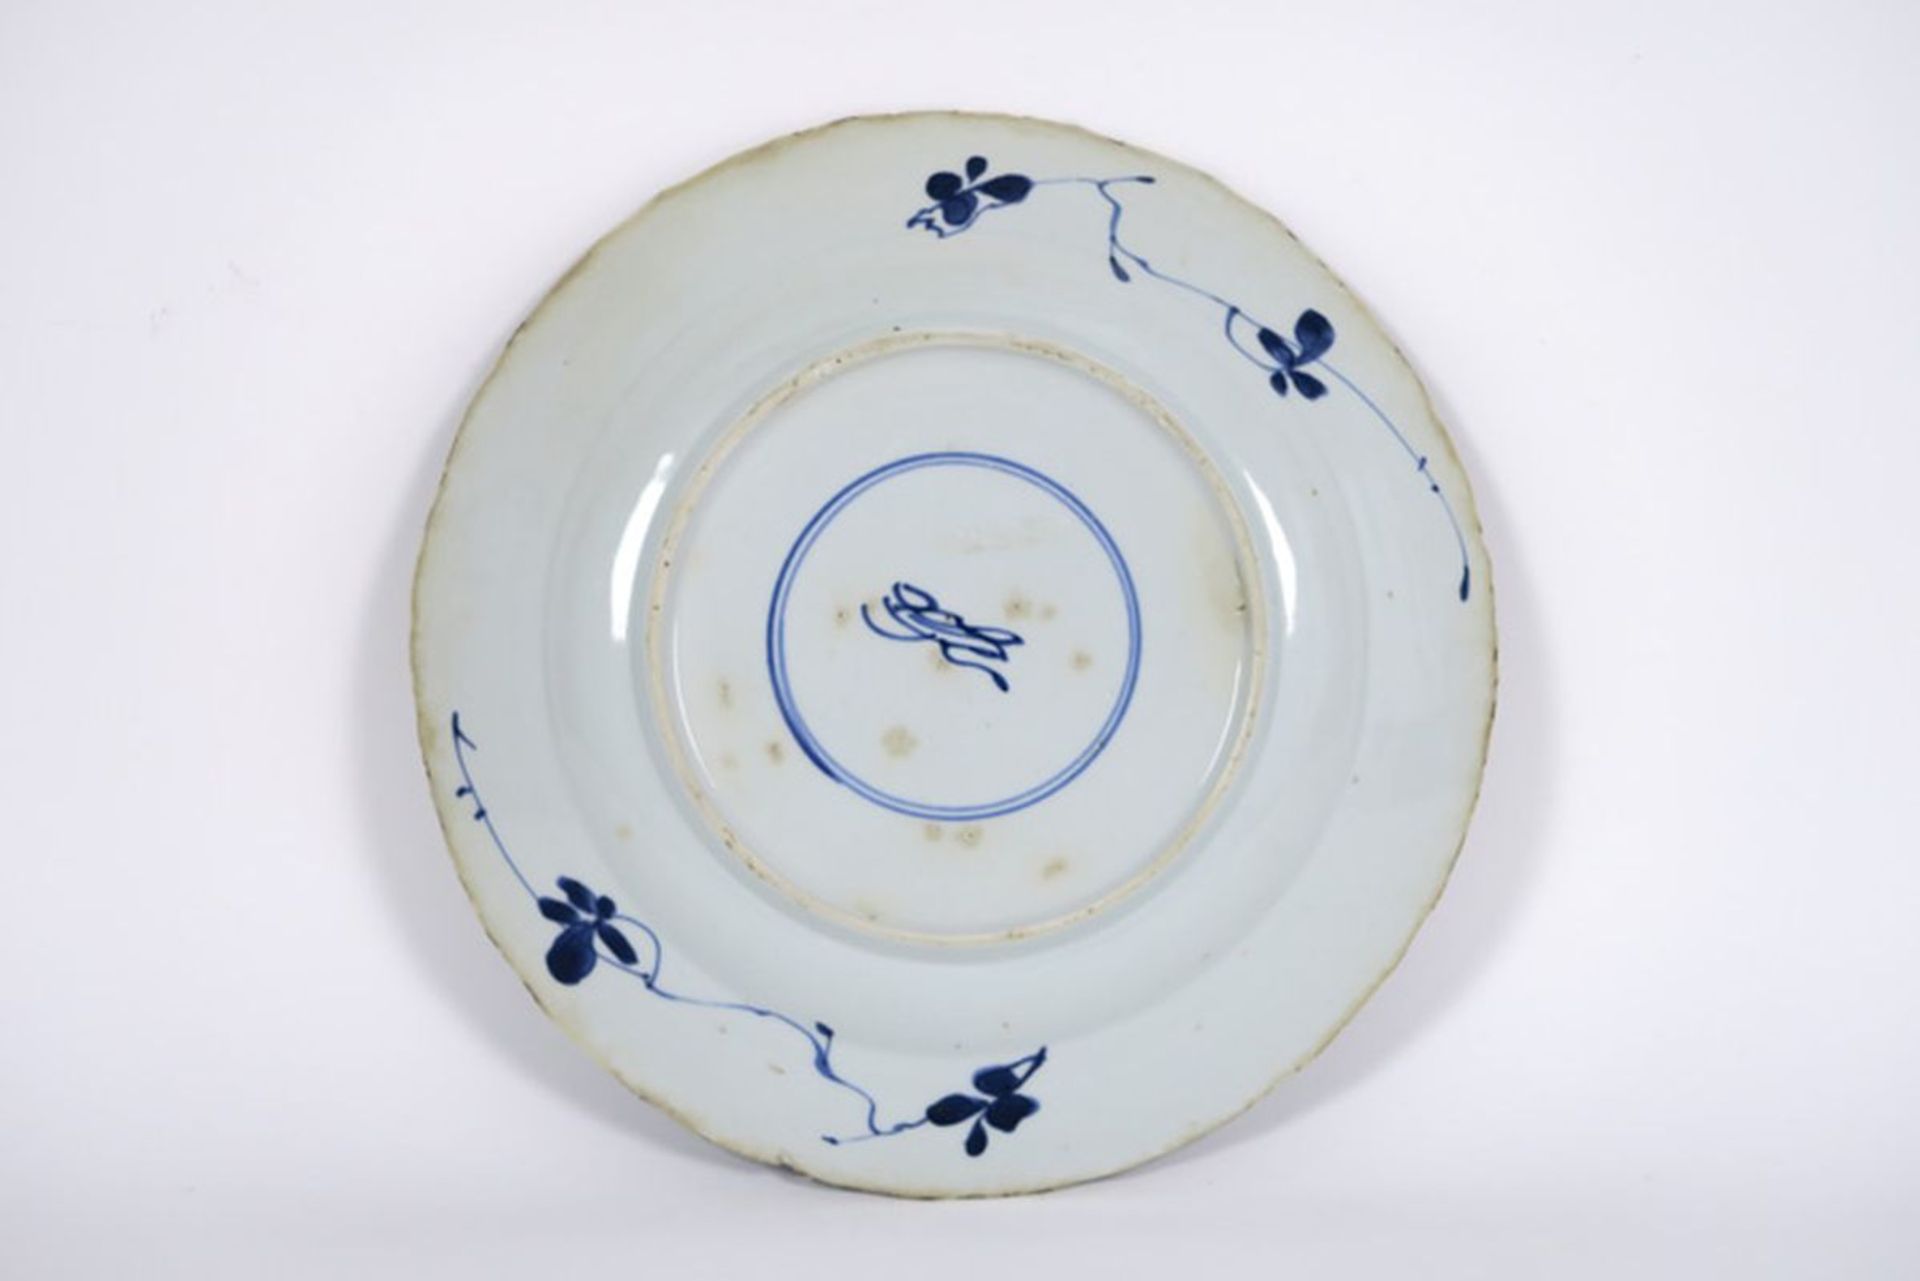 17th Cent. Chinese "Kang Hsi" platein porcelain with blue-white decor with jardinier [...] - Image 2 of 2